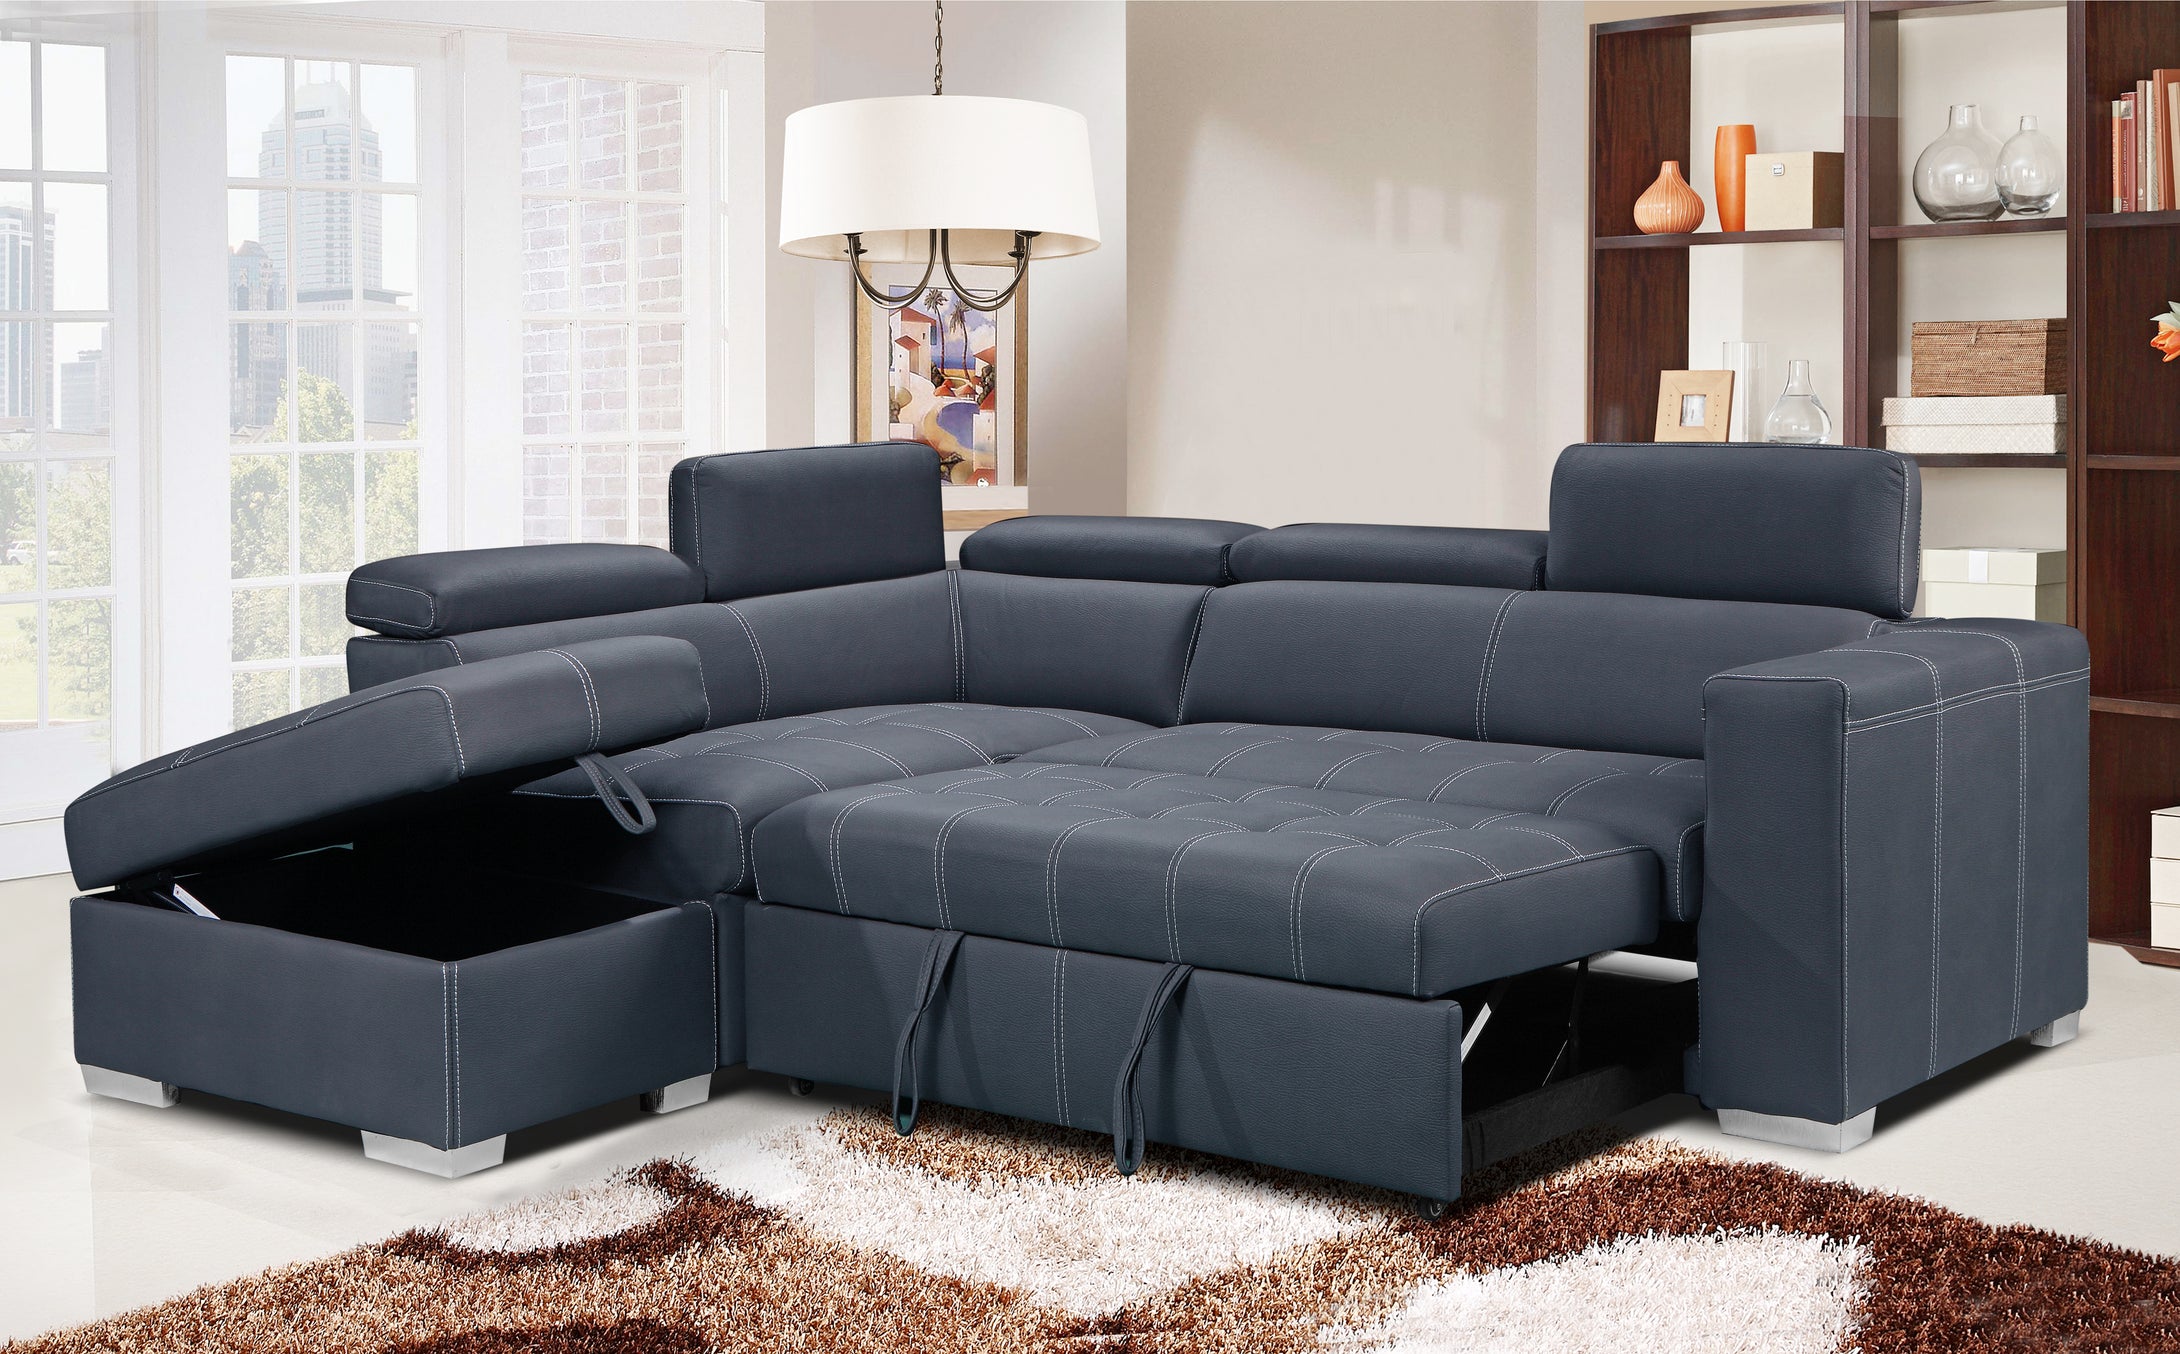 Positano Pull-Out Sectional Sofa - Richicollection Furniture Warehouse